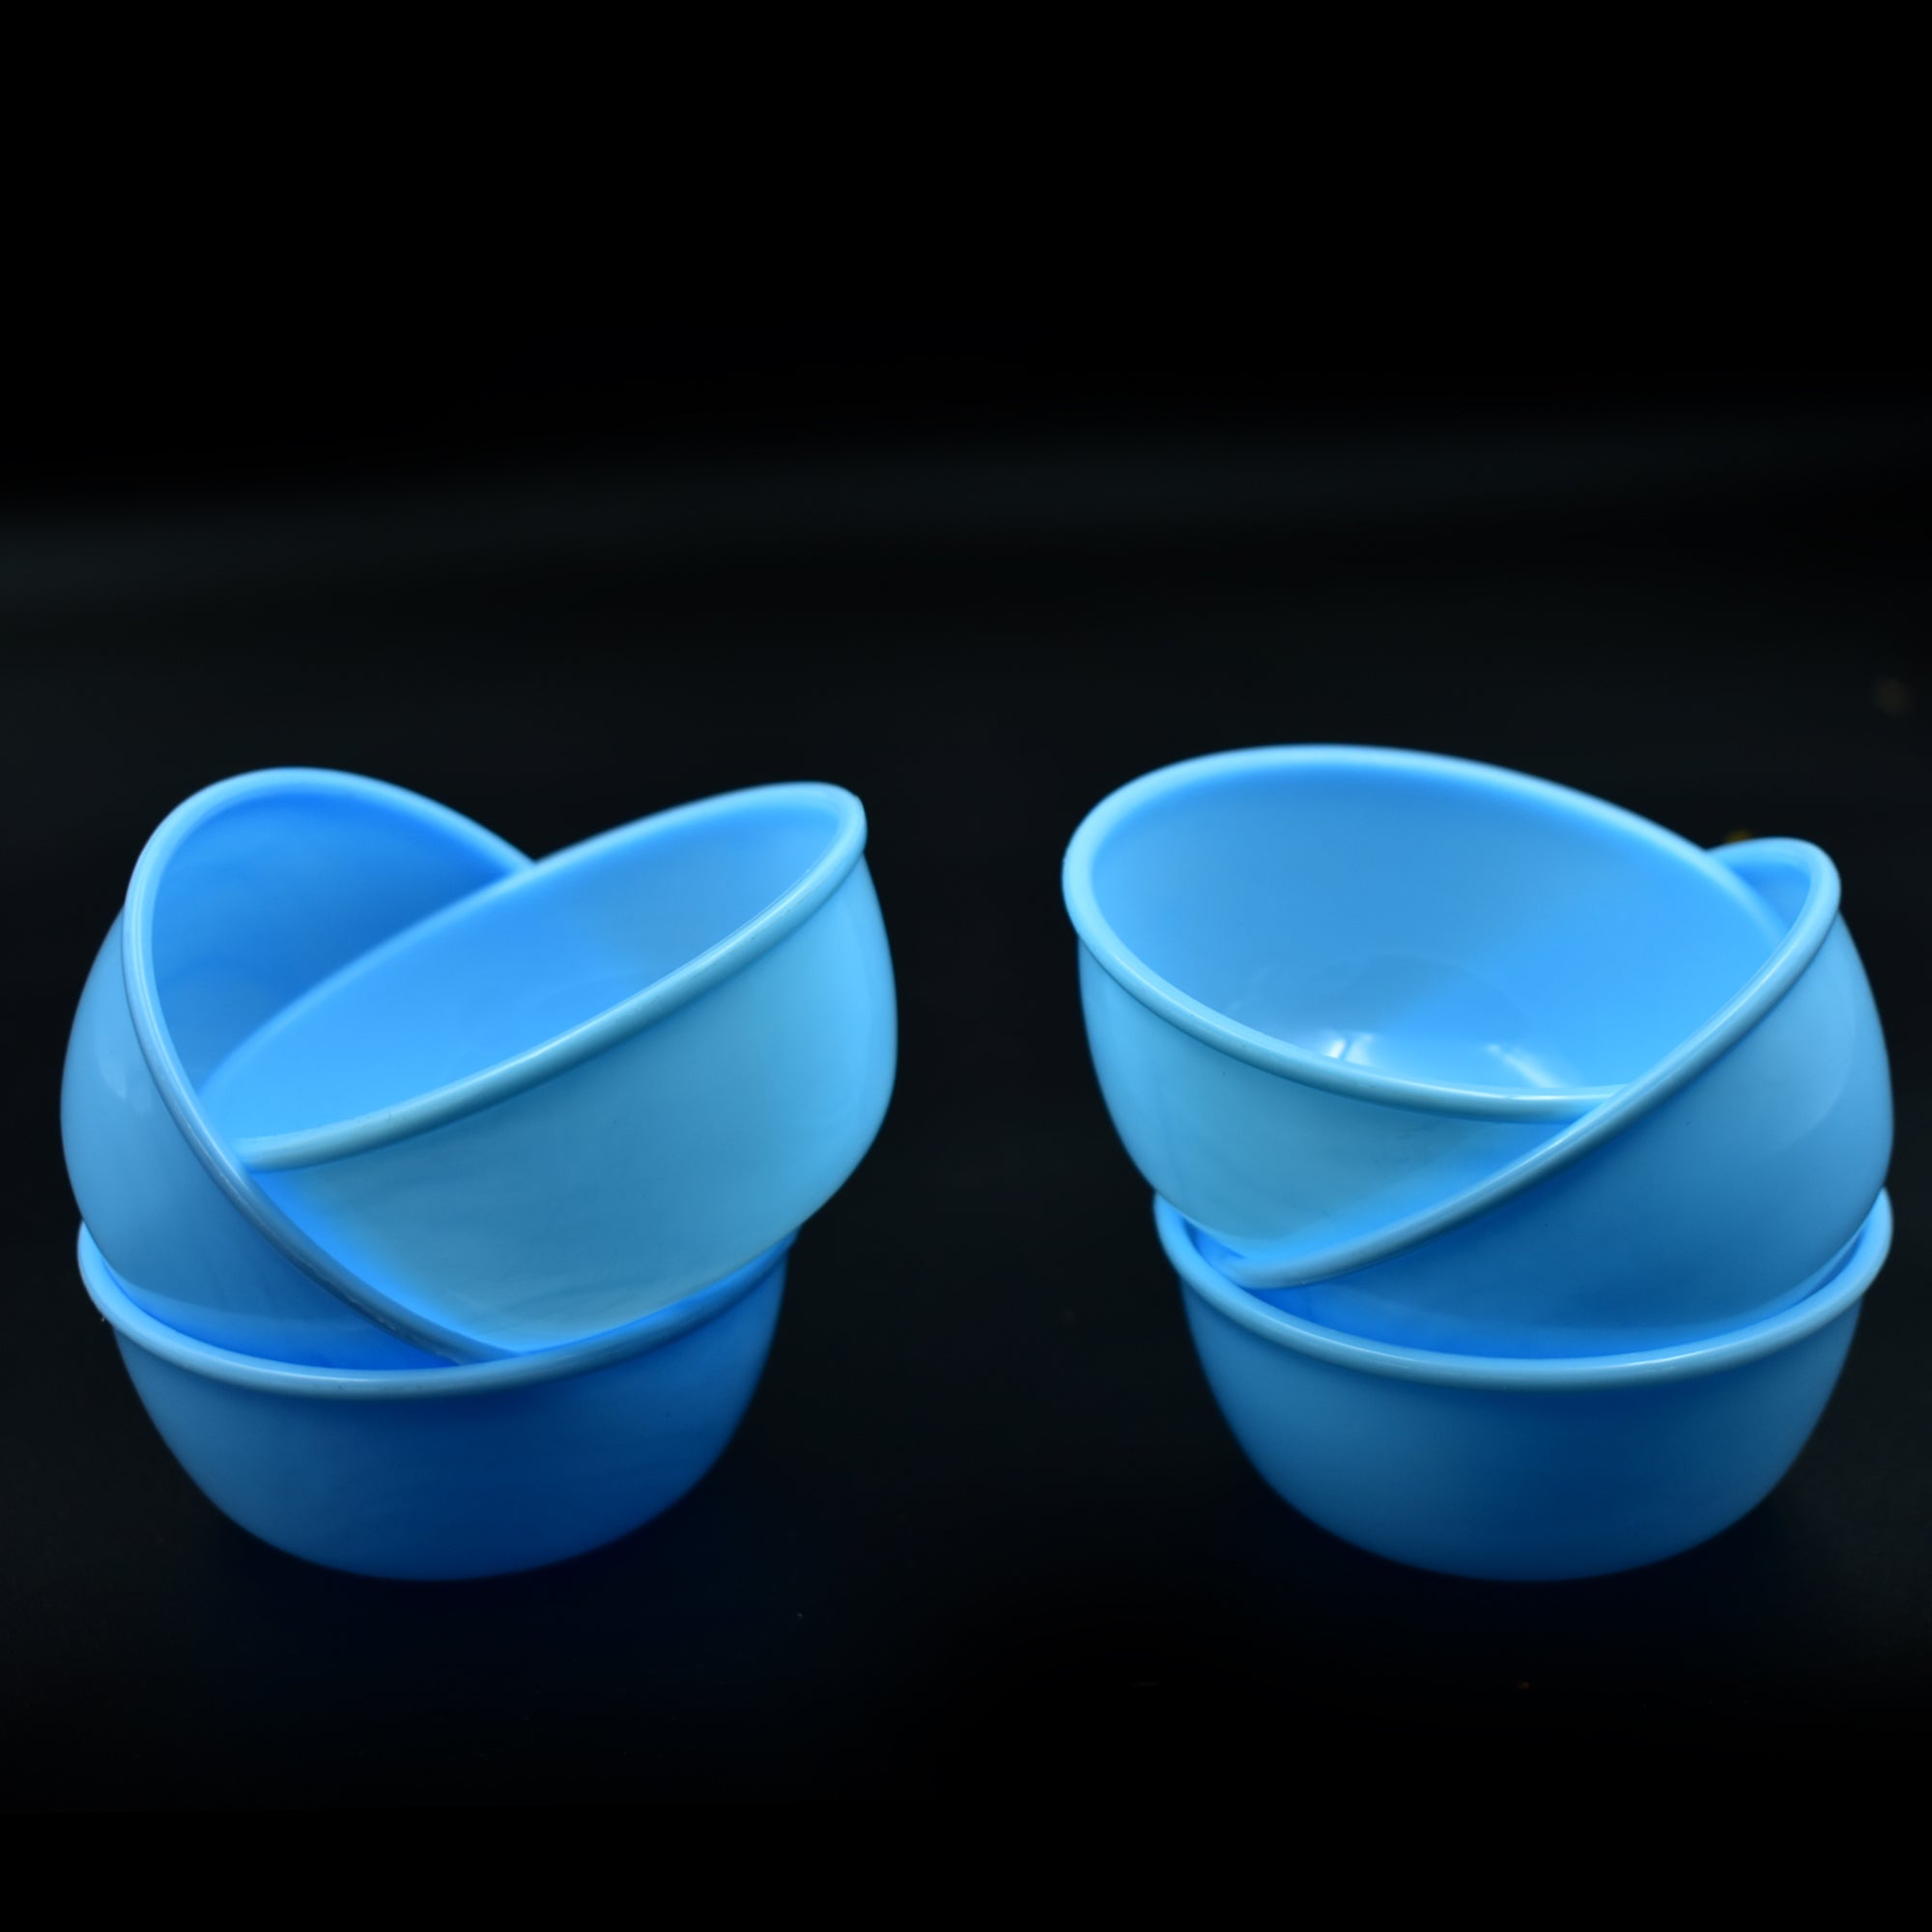 2425 Small Plastic Bowl Set, Microwave Safe Unbreakable, Set of 6 